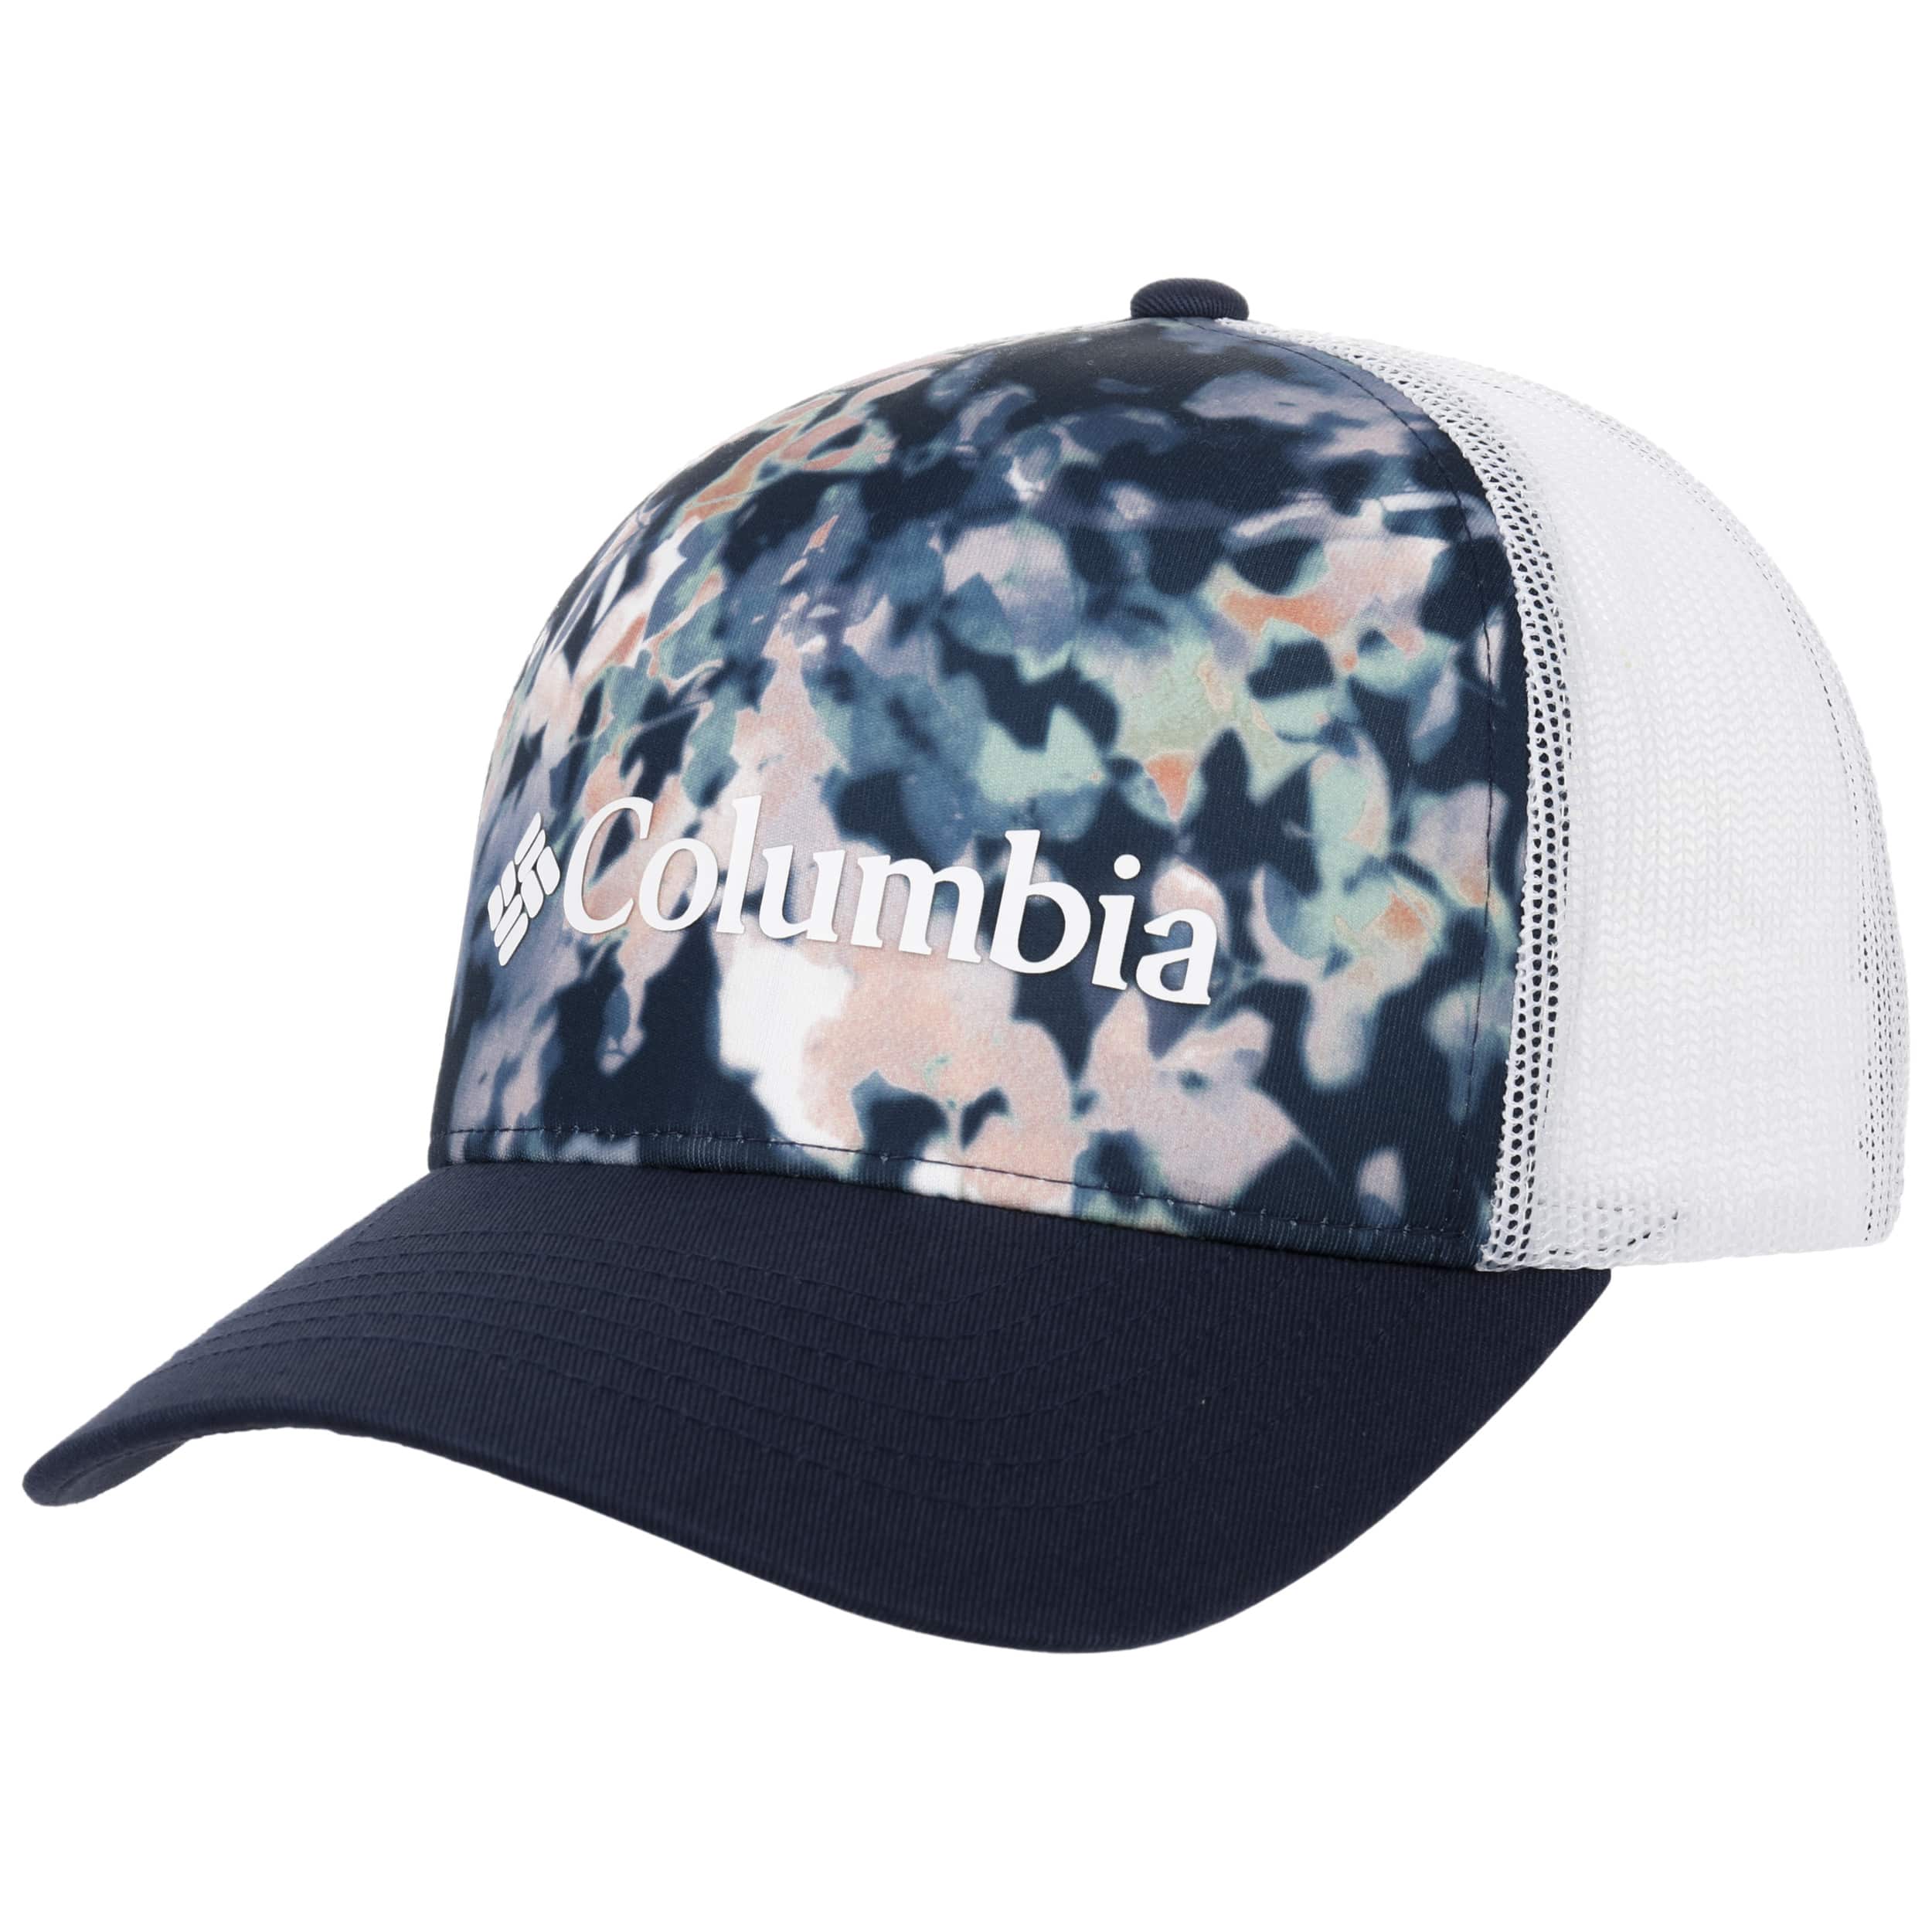 Casquette Homme PUNCHBOWL TRUCKER COLUMBIA